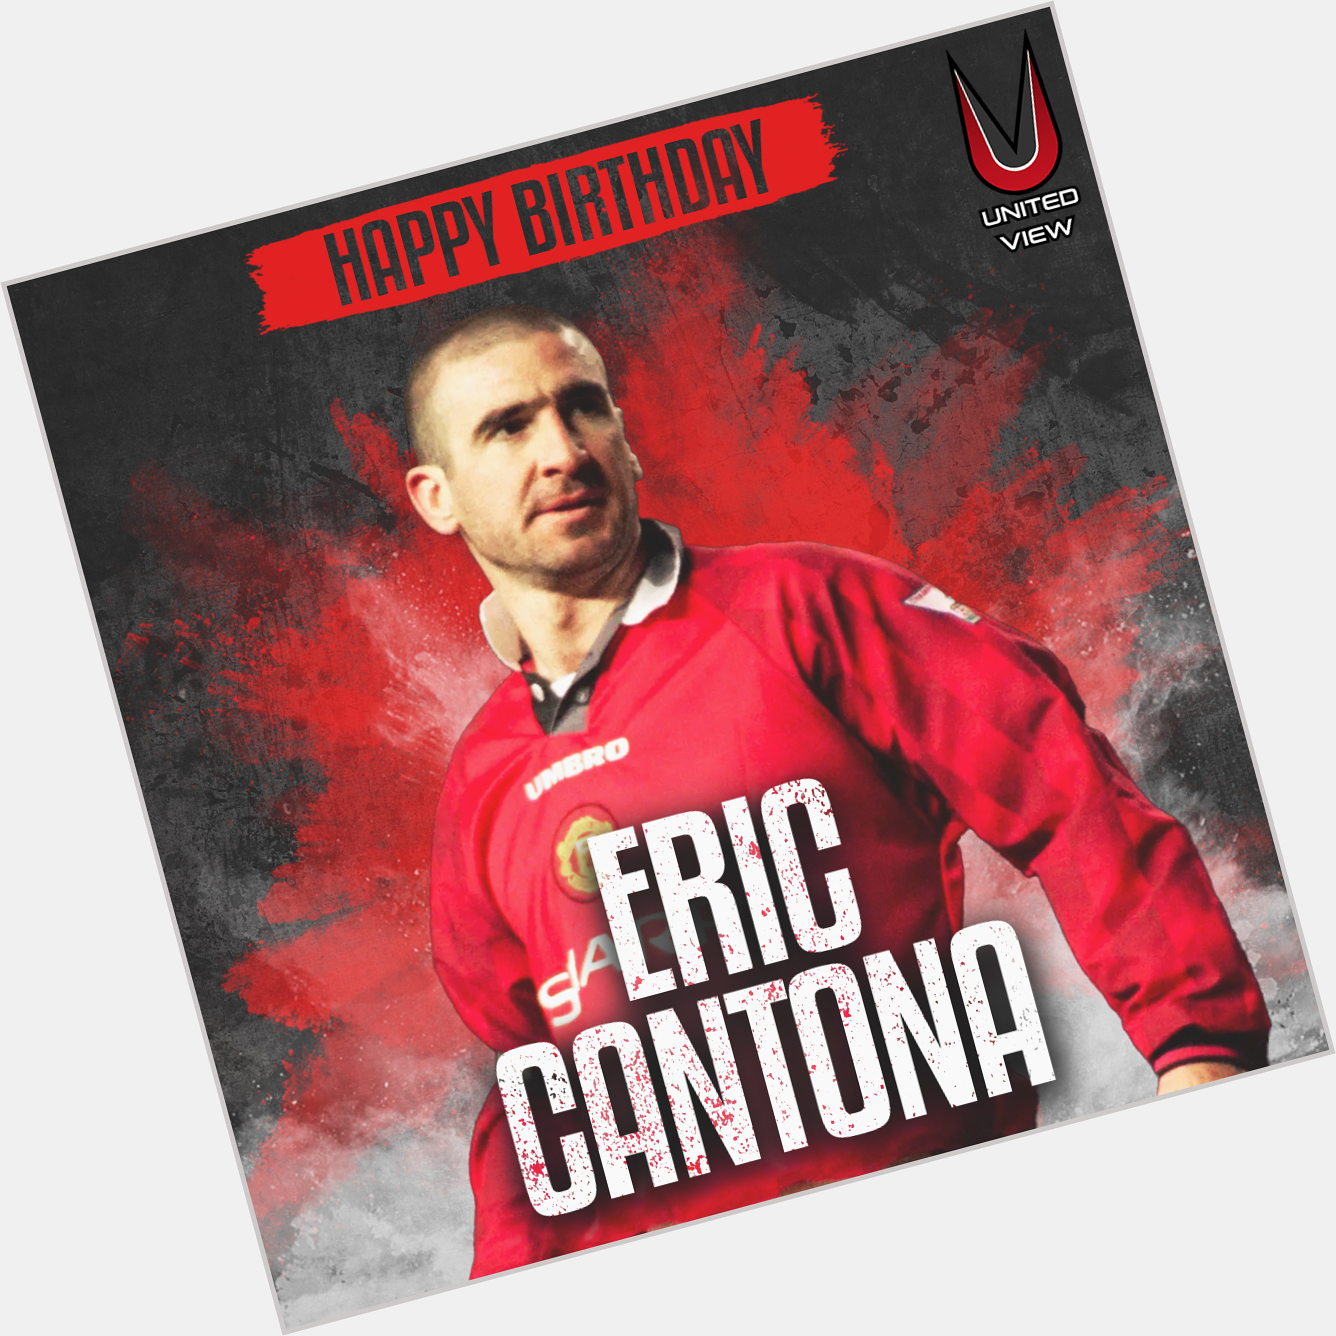 Happy Birthday Eric Cantona!  The former Manchester United forward turns 56 years old today   